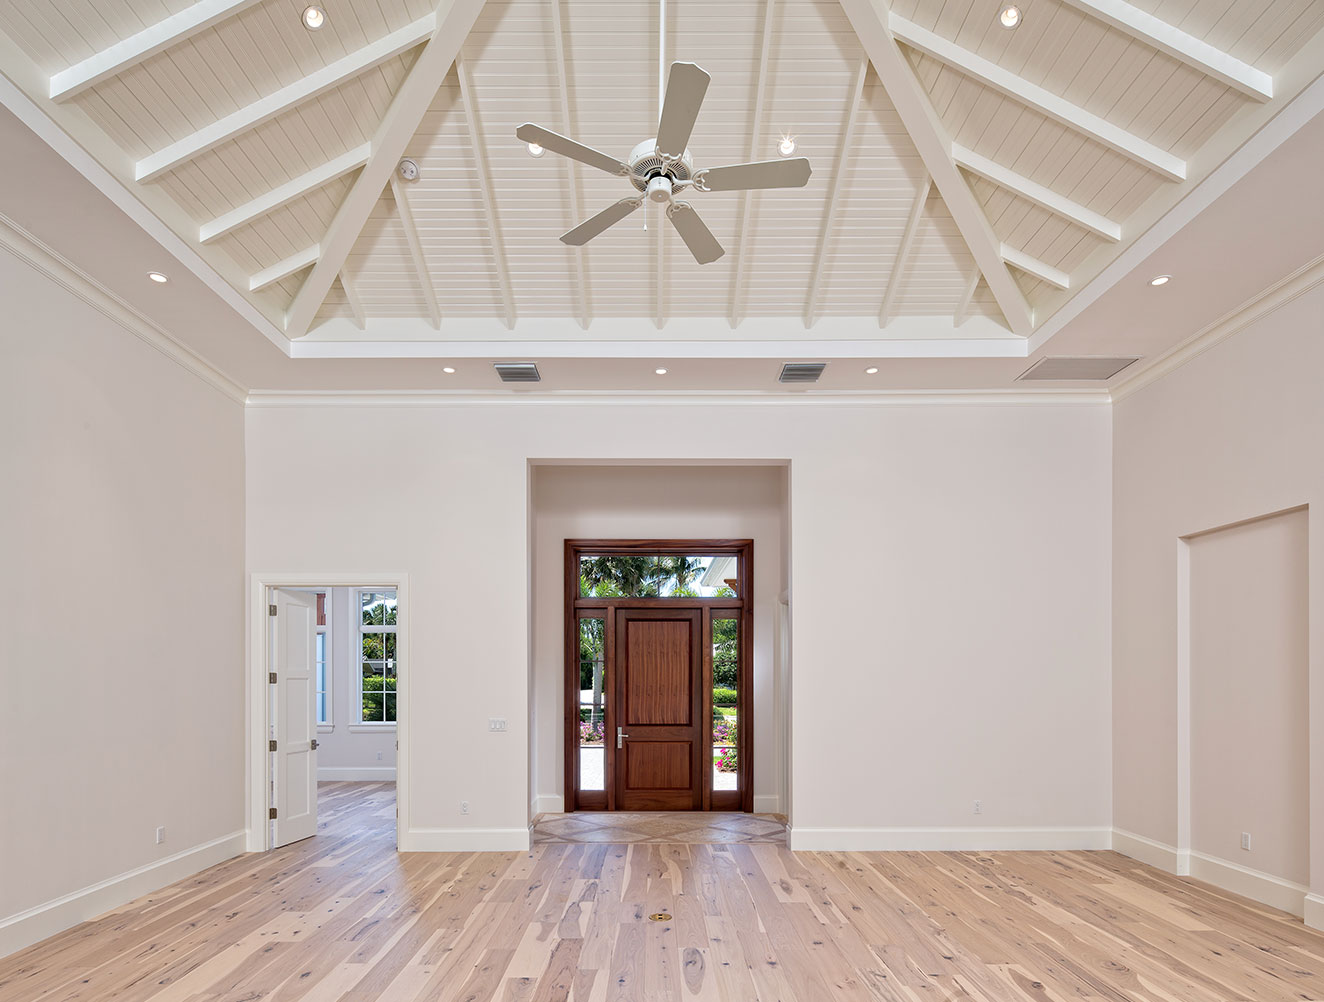 Front foyer and great room with decorative beam ceilings and hardwood flooring